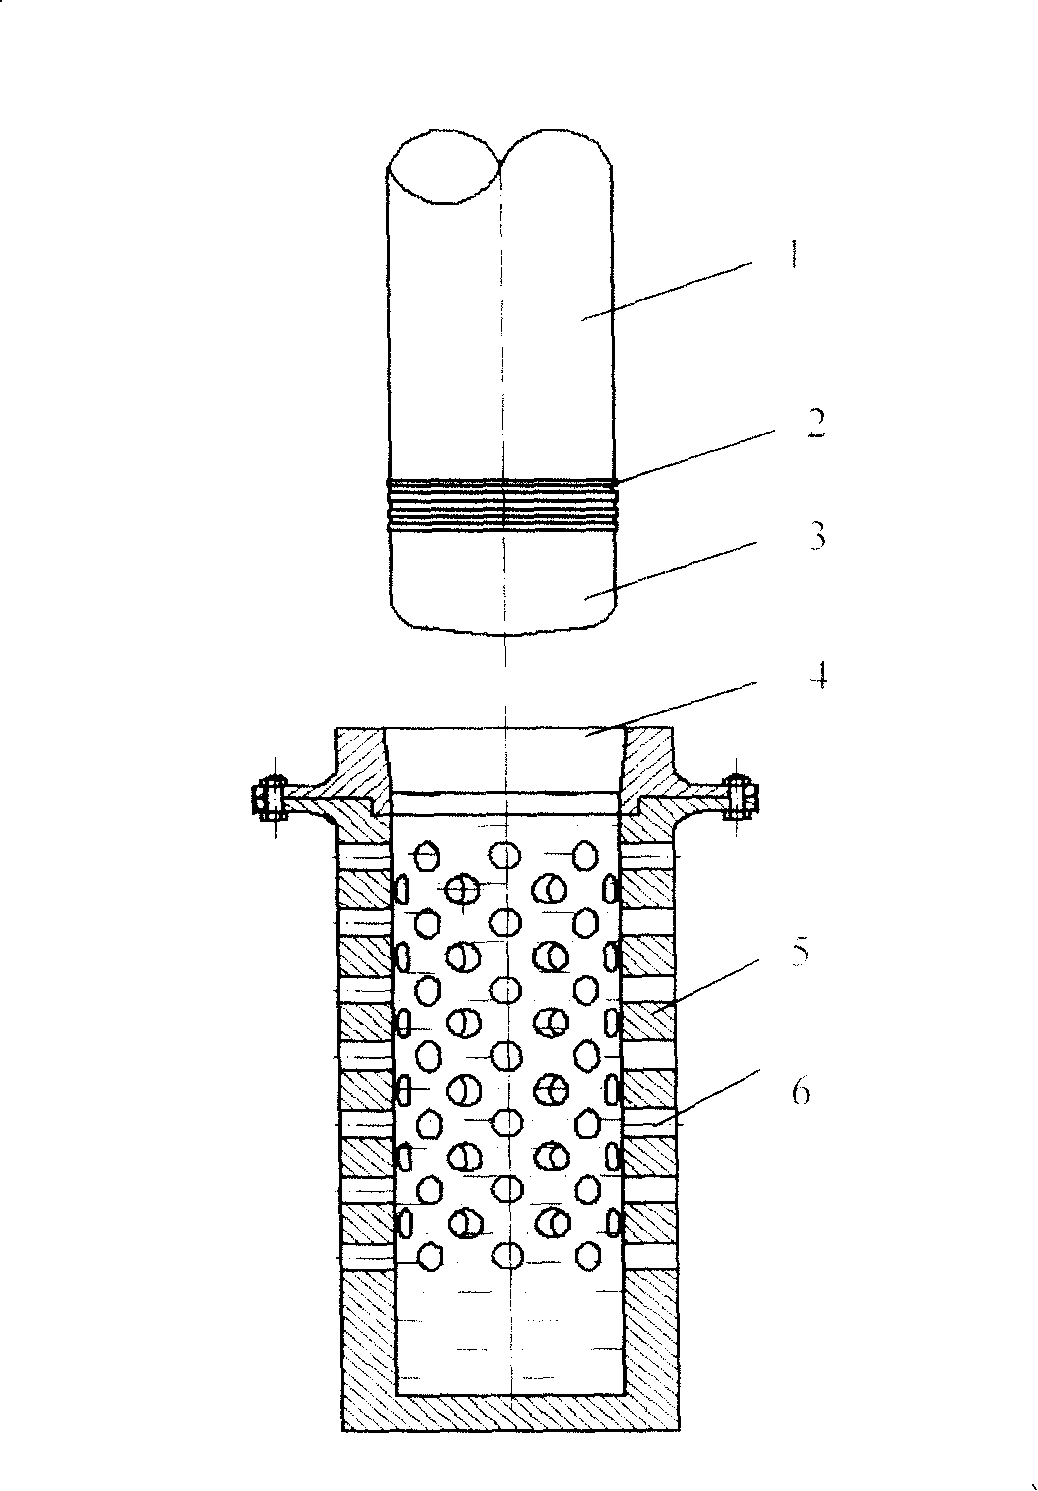 Hydraulic damping energy-absorbing device